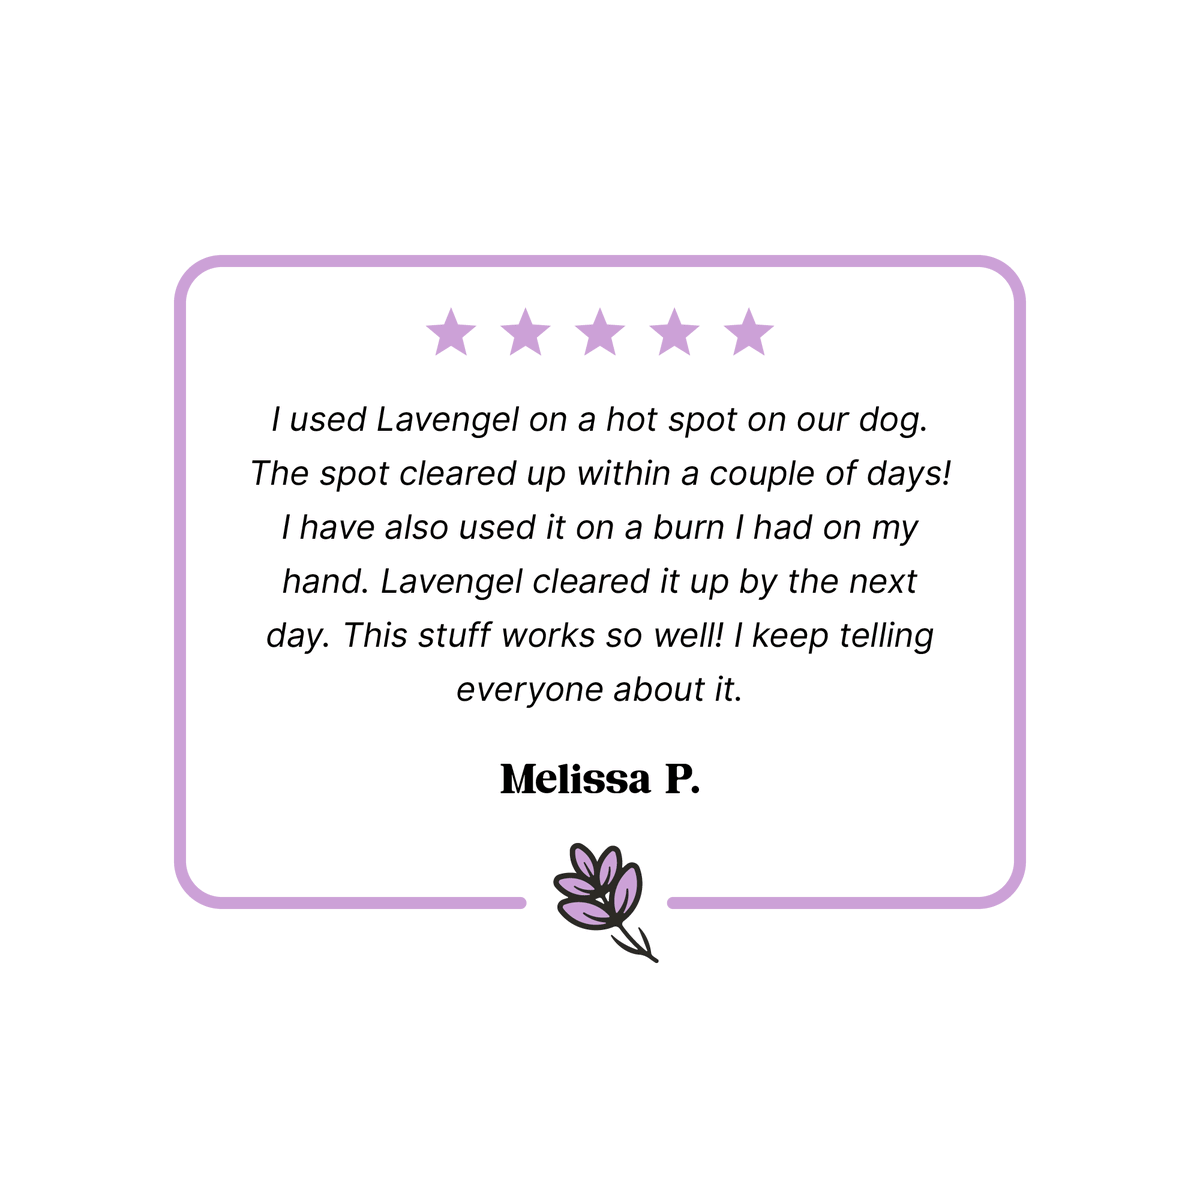 #lavengel is excellent for both dog hotspots and human hotspots - aka burns.
-
-
-
#lavenderoil #productreview #doghotspots #dogburns #dogfirstaid #dogwoundcare #dogskincare #dogpainrelief #vetrecommended #vetapproved #naturaldogproducts